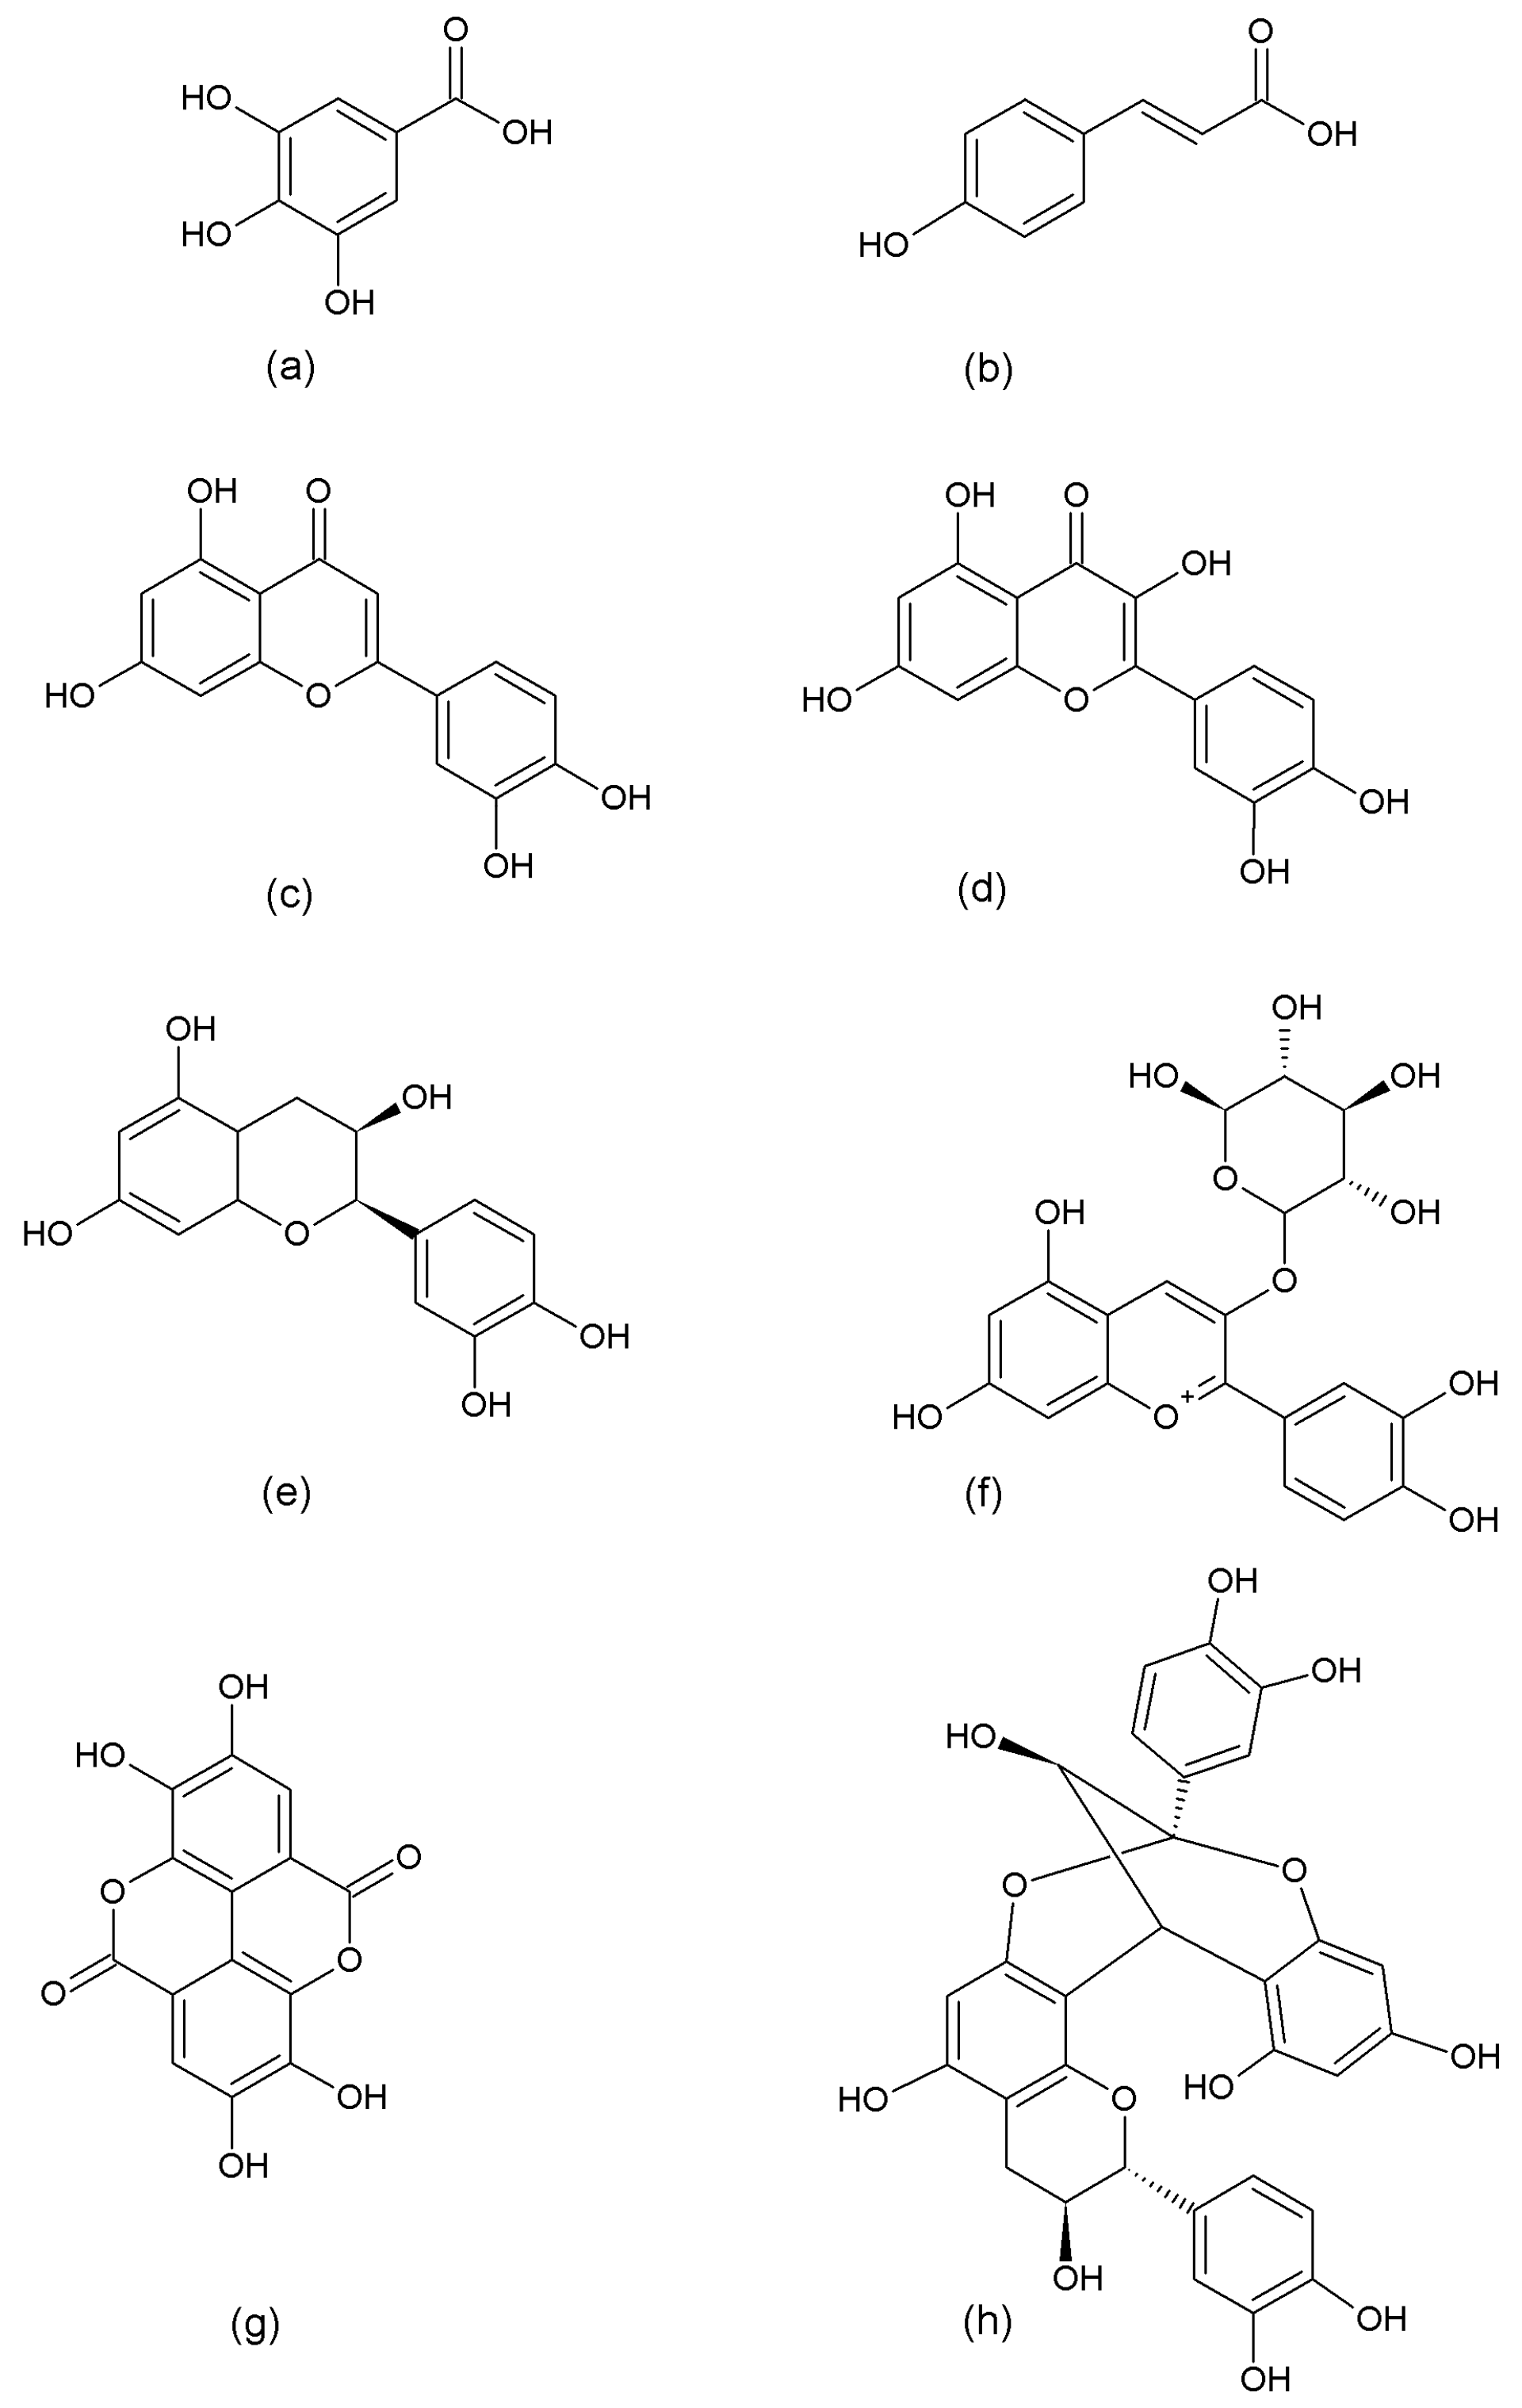 Molecules Free Full Text Polyphenolic Compounds And Digestive Enzymes In Vitro Non Covalent Interactions Html